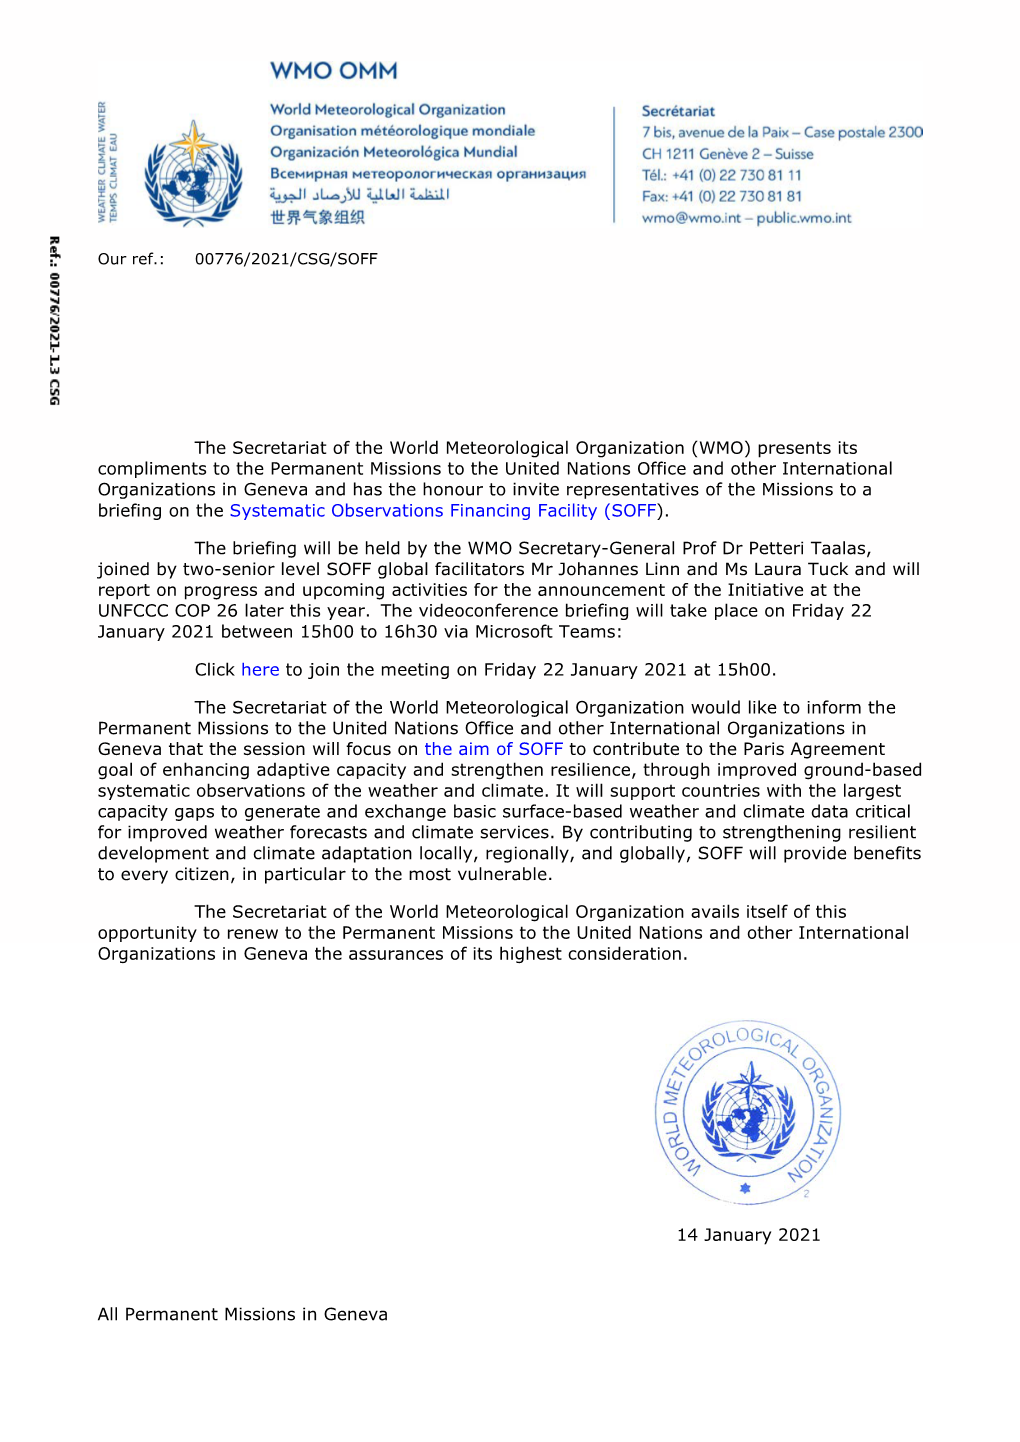 The Secretariat of the World Meteorological Organization (WMO) Presents Its Compliments to the Permanent Missions to the United